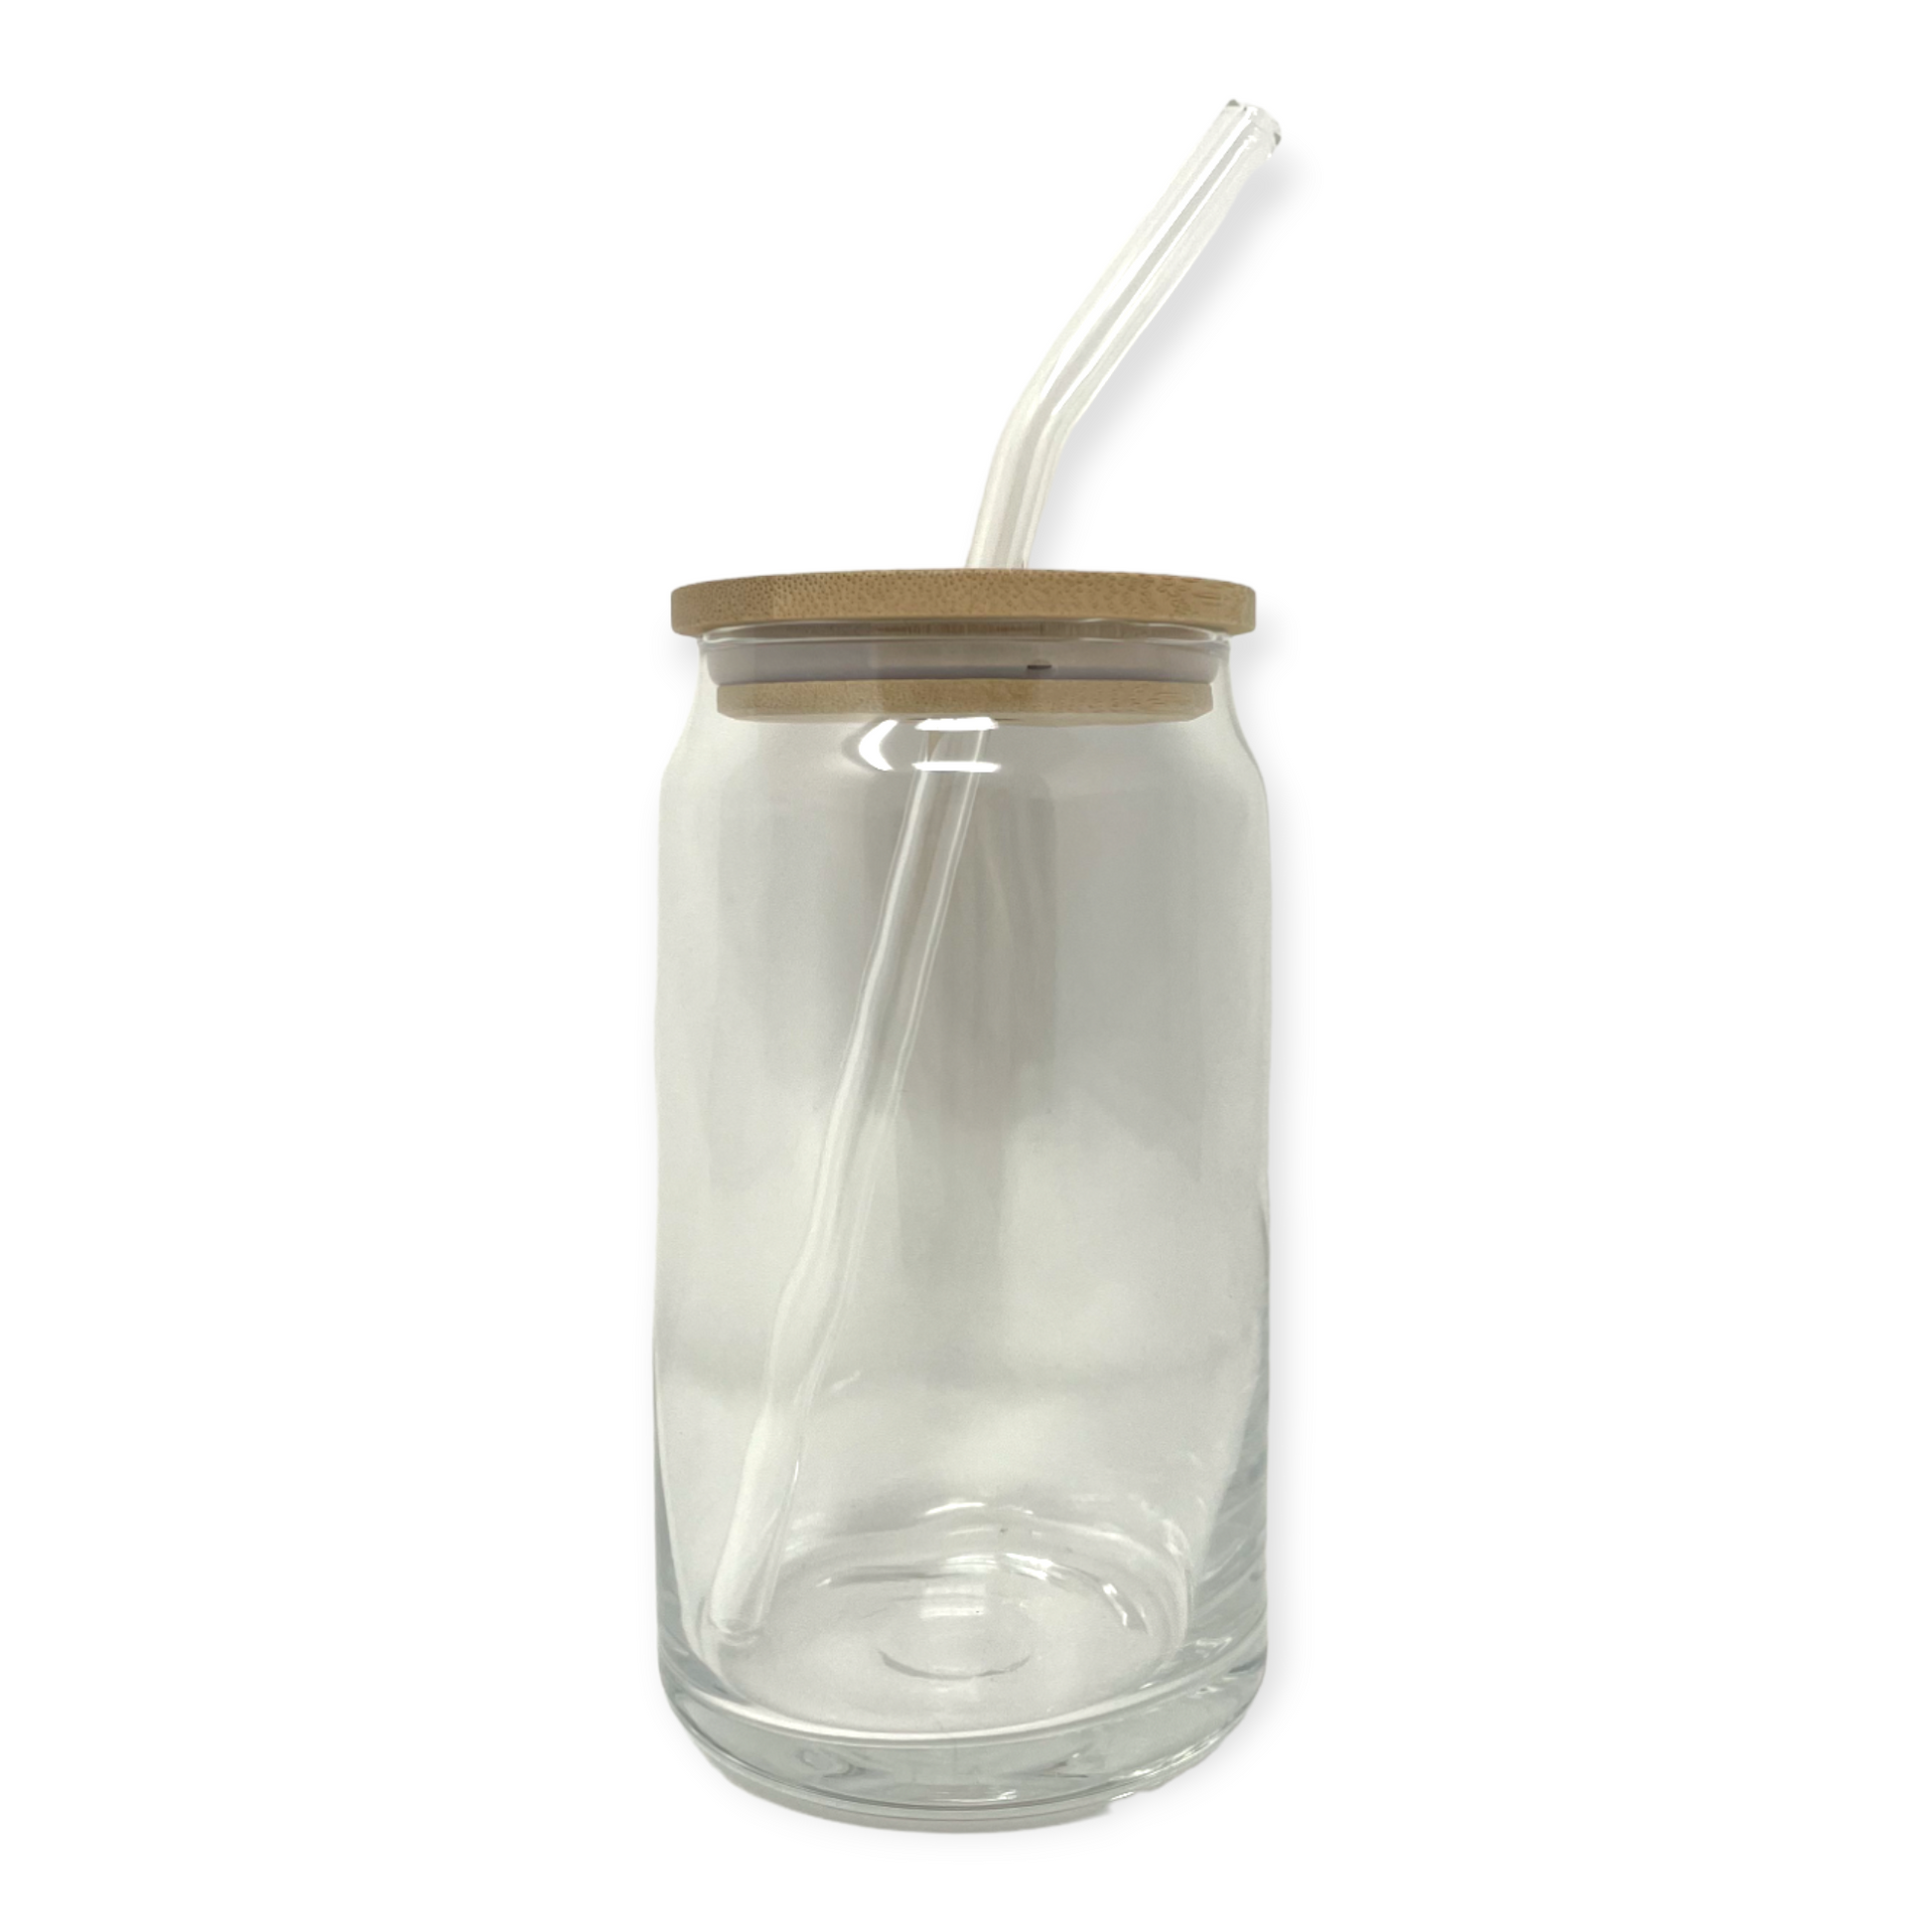 Glass Cup with Bamboo Lid & Straw – Refillism